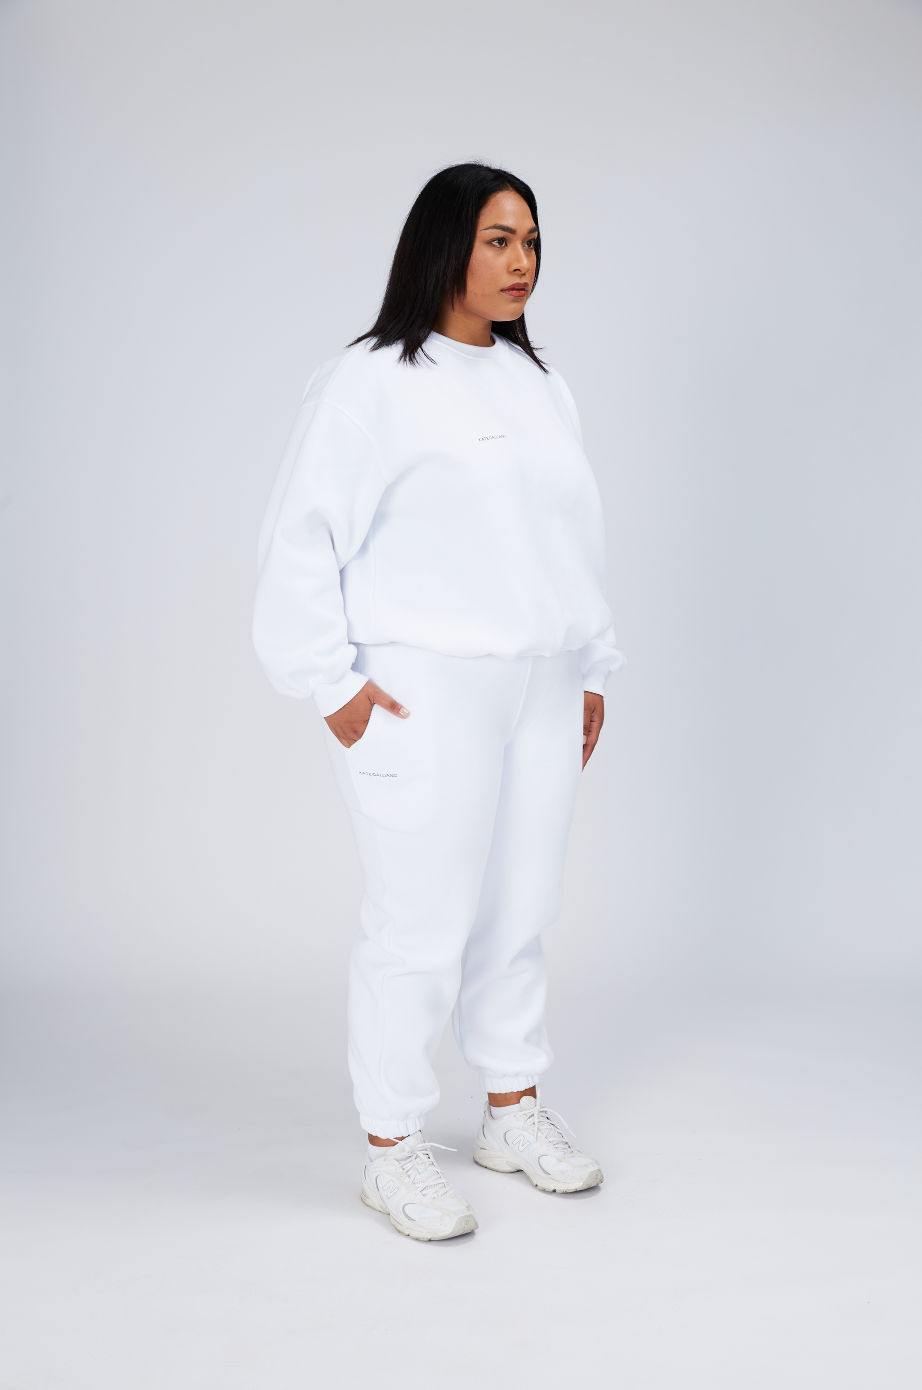 women’s white jumper - white jumper and trackpants - kate galliano activewear